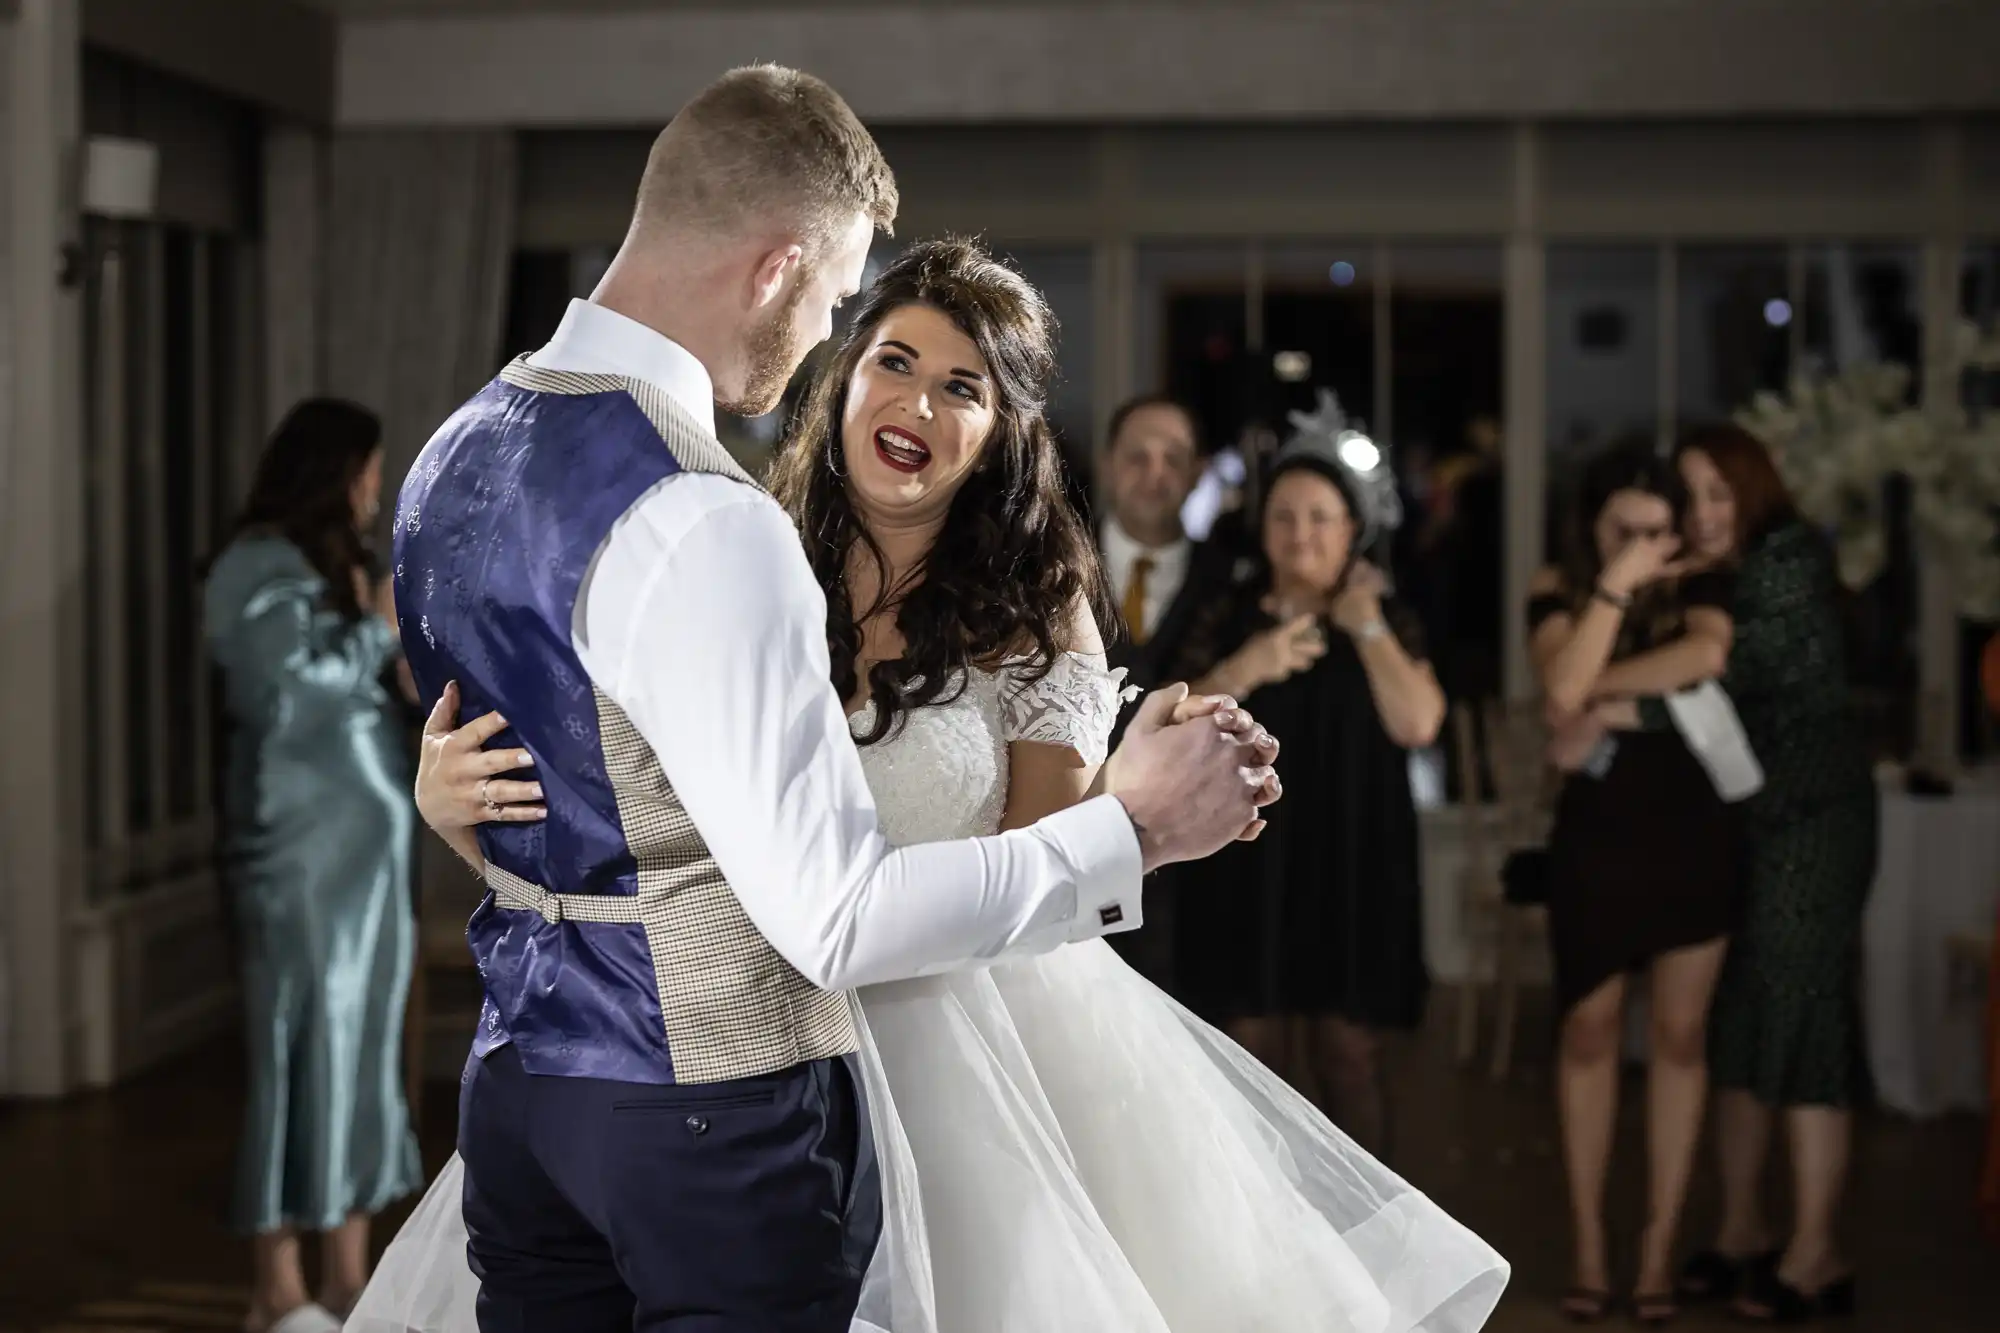 A bride and groom share a dance at their wedding reception, with guests watching and taking photos in the background.